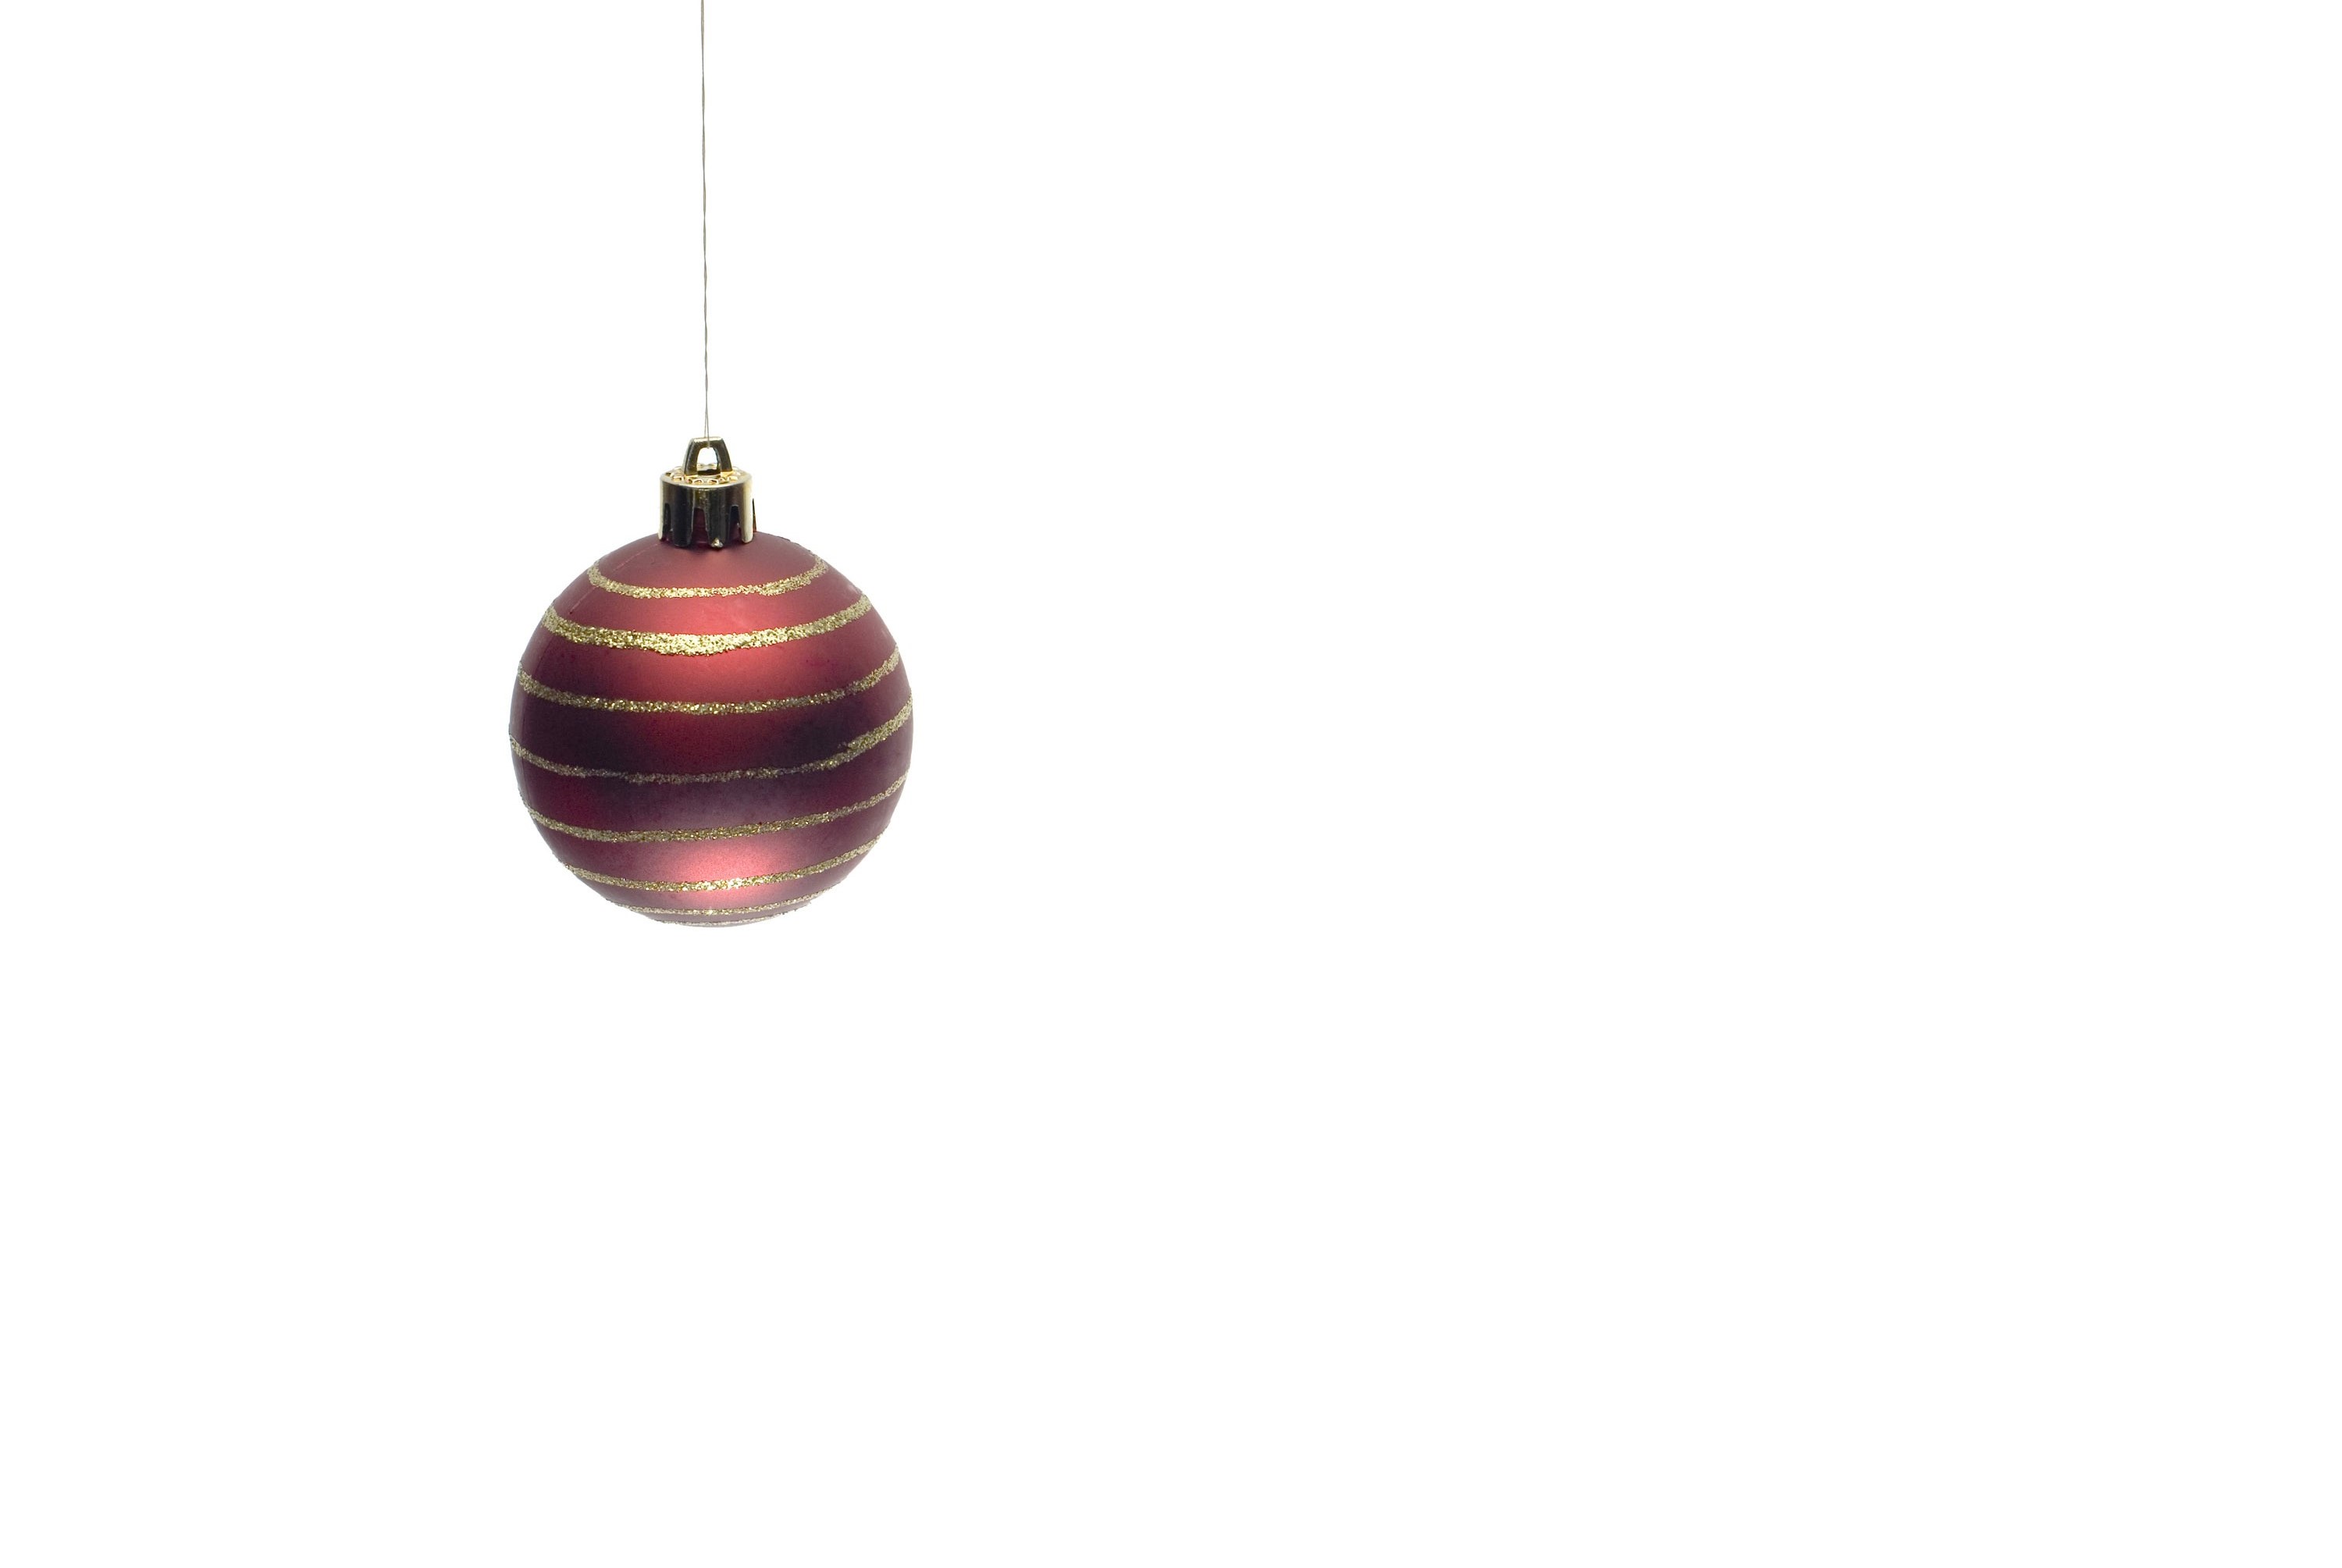 Photo of Hanging Ornament | Free christmas images